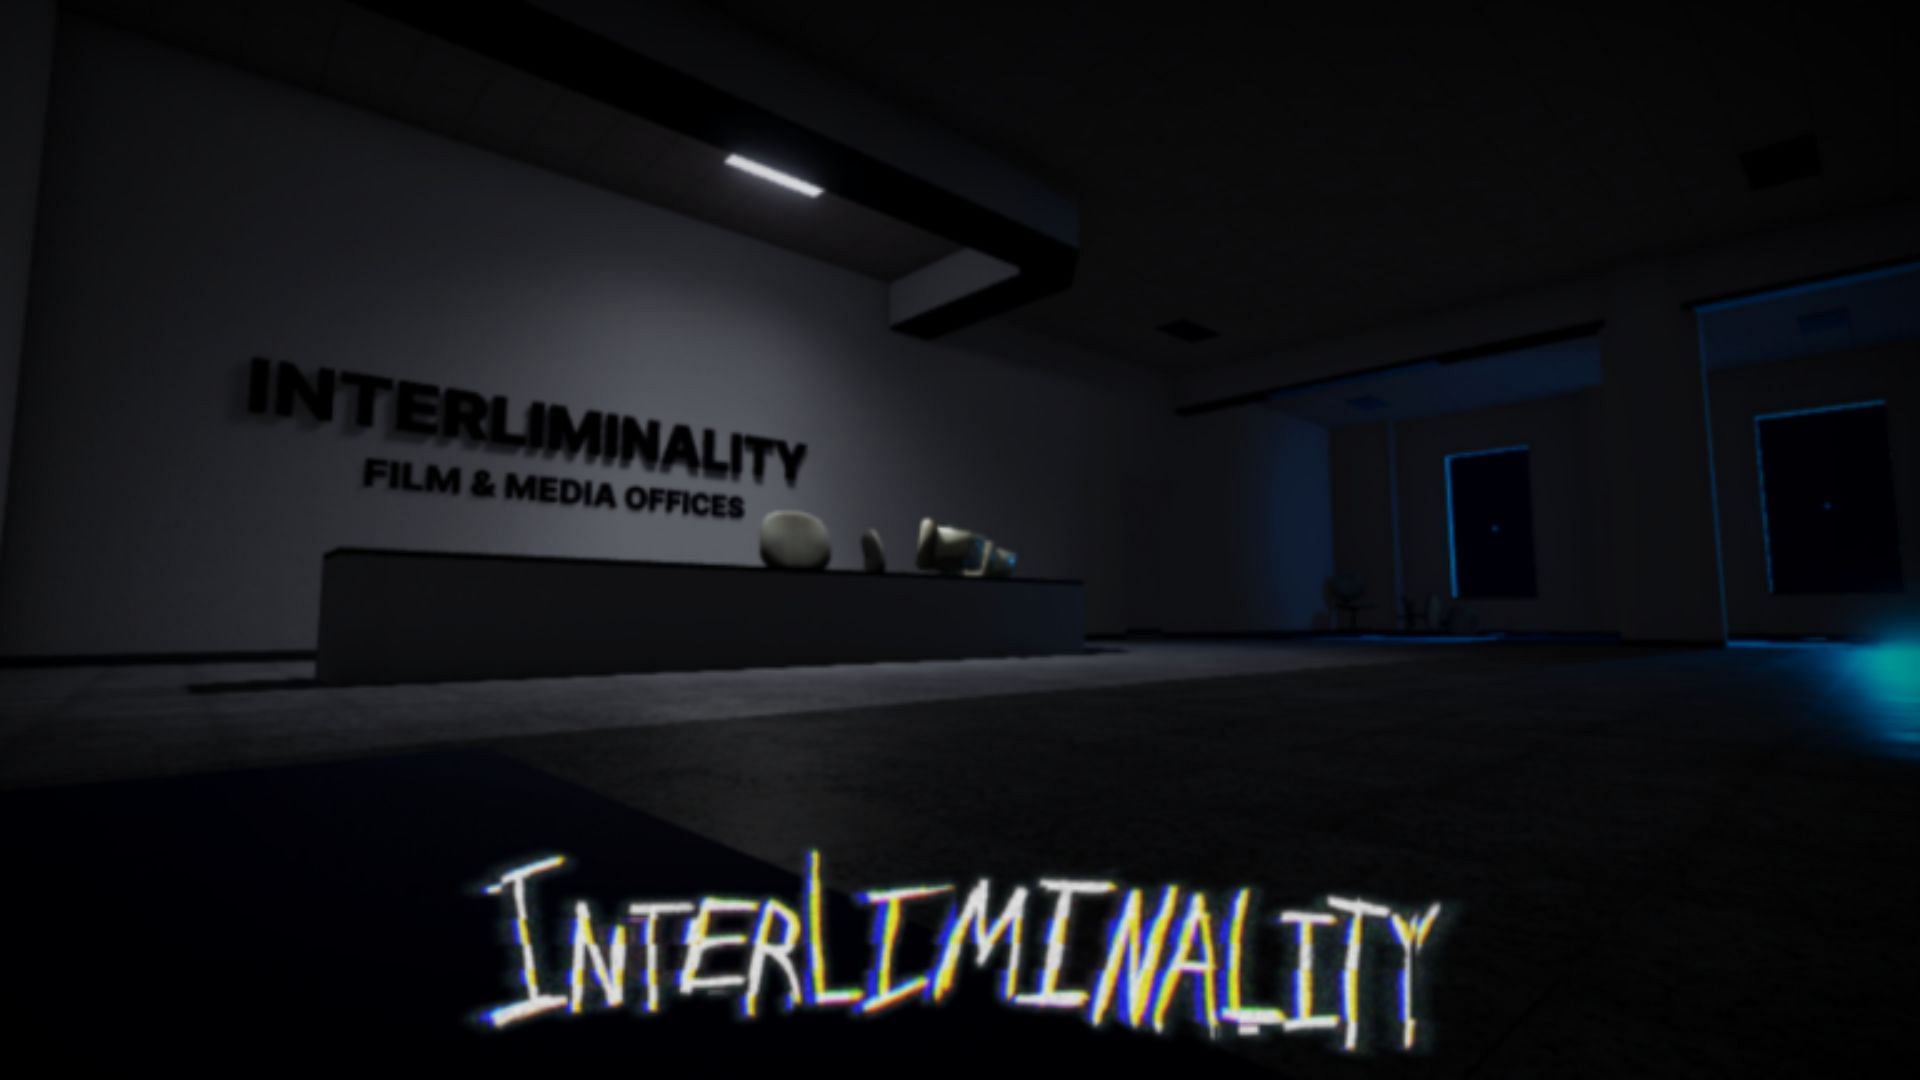 Overview of Interliminality (Image via Roblox)